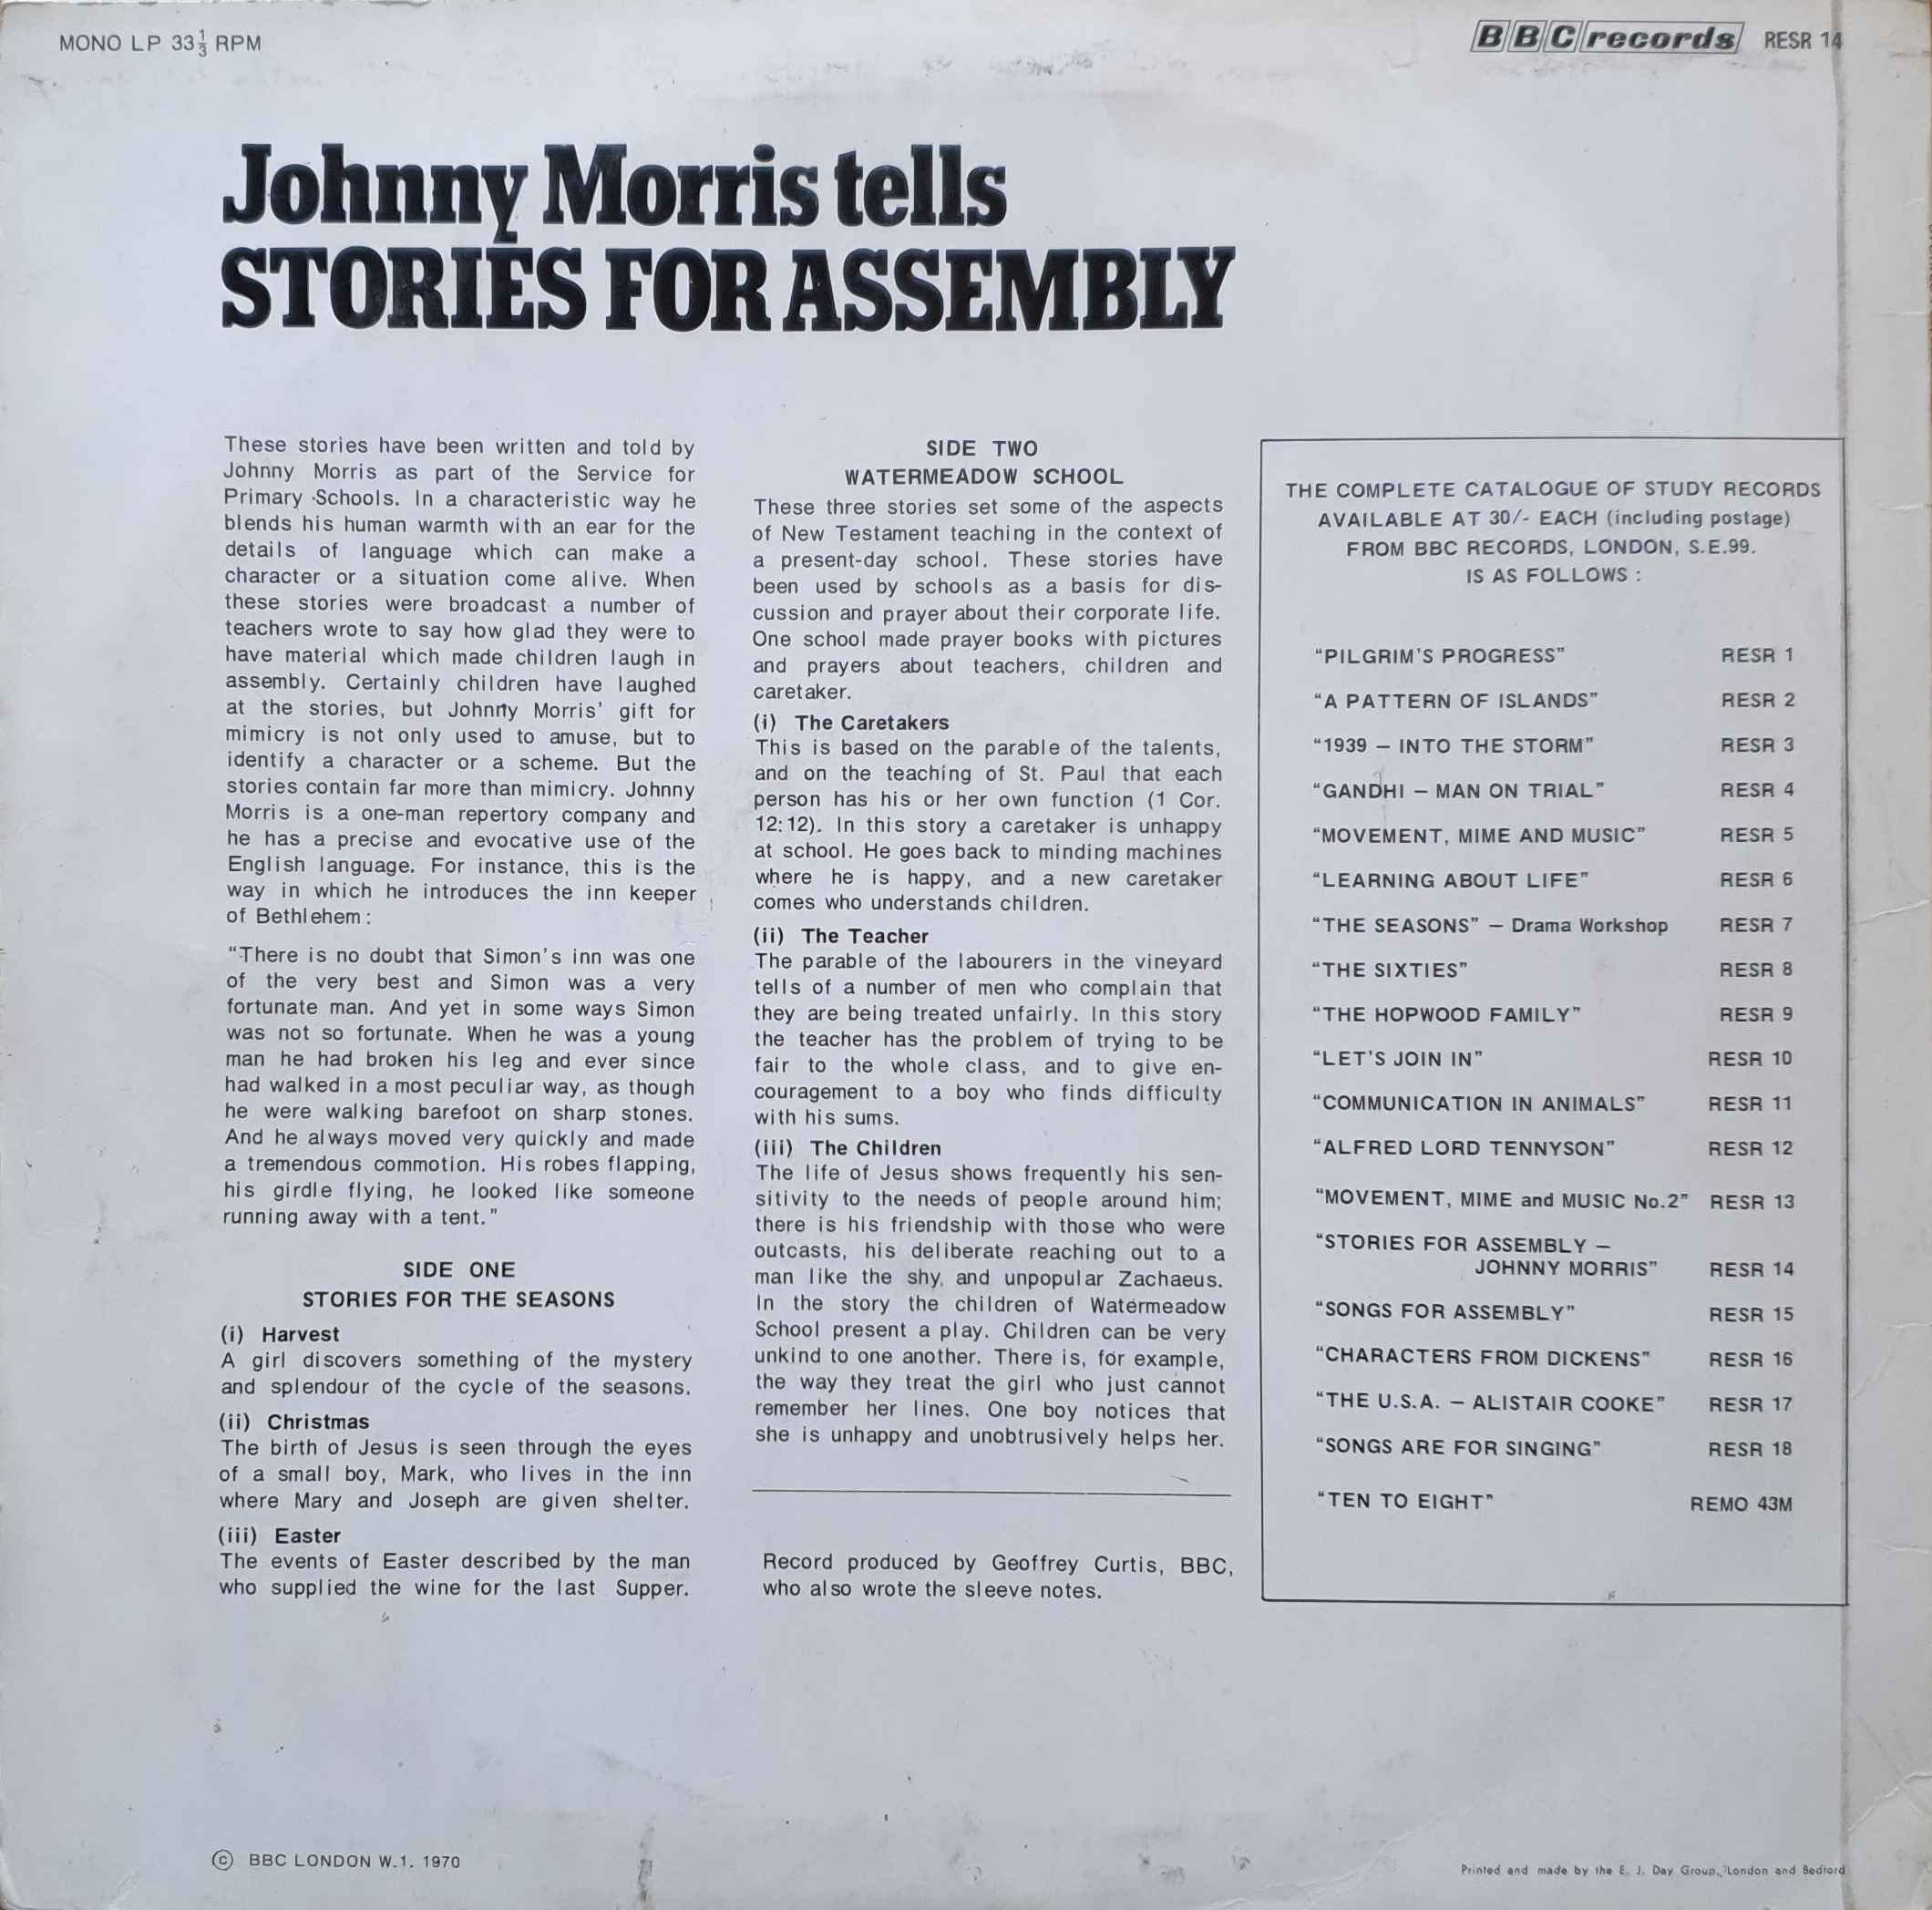 Picture of RESR 14 Stories for assembly by artist Johnny Morris from the BBC records and Tapes library